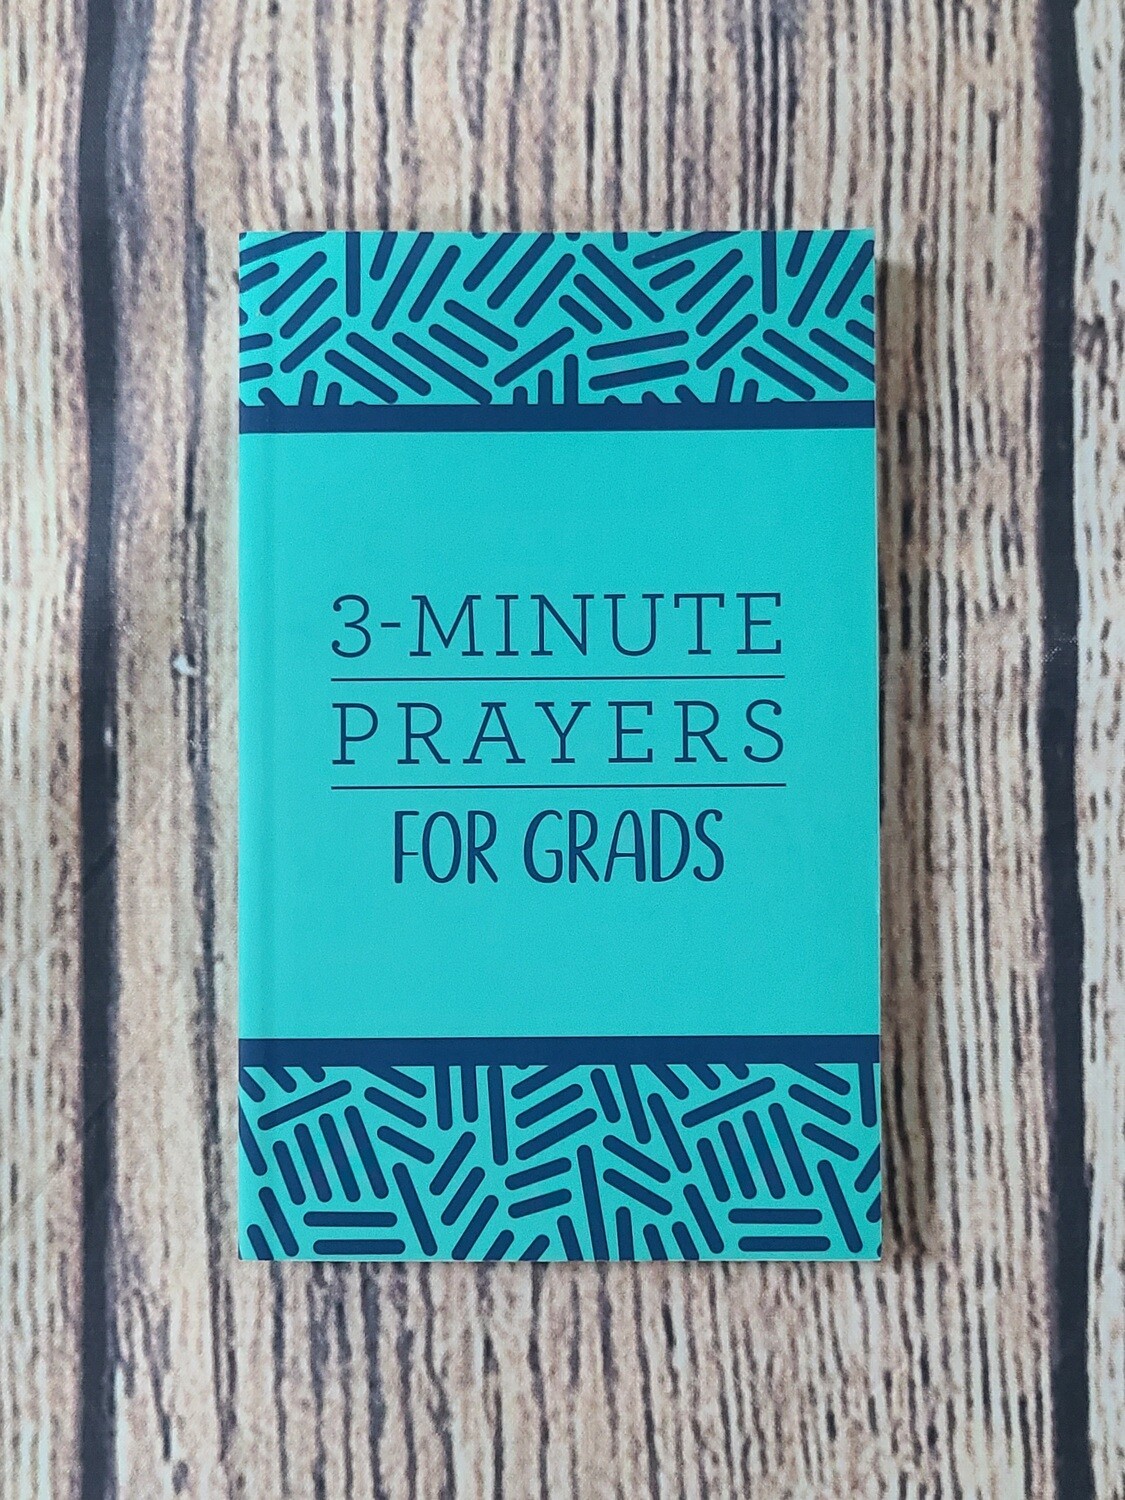 3-Minute Prayers for Grads by Jean Fischer - Great Condition